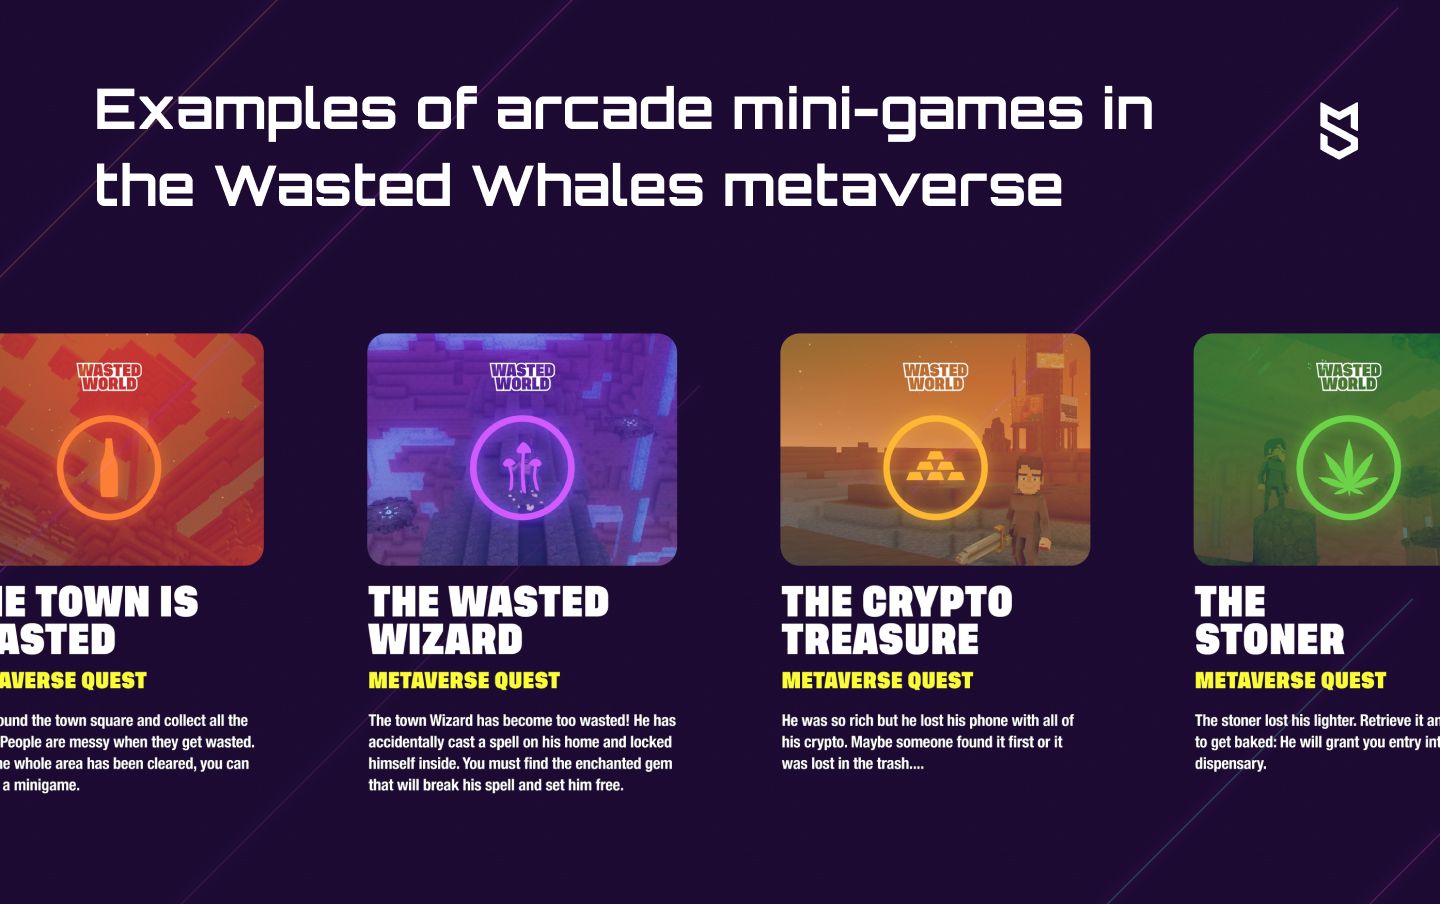 Examples of different arcade mini-games in the Wasted Whales metaverse